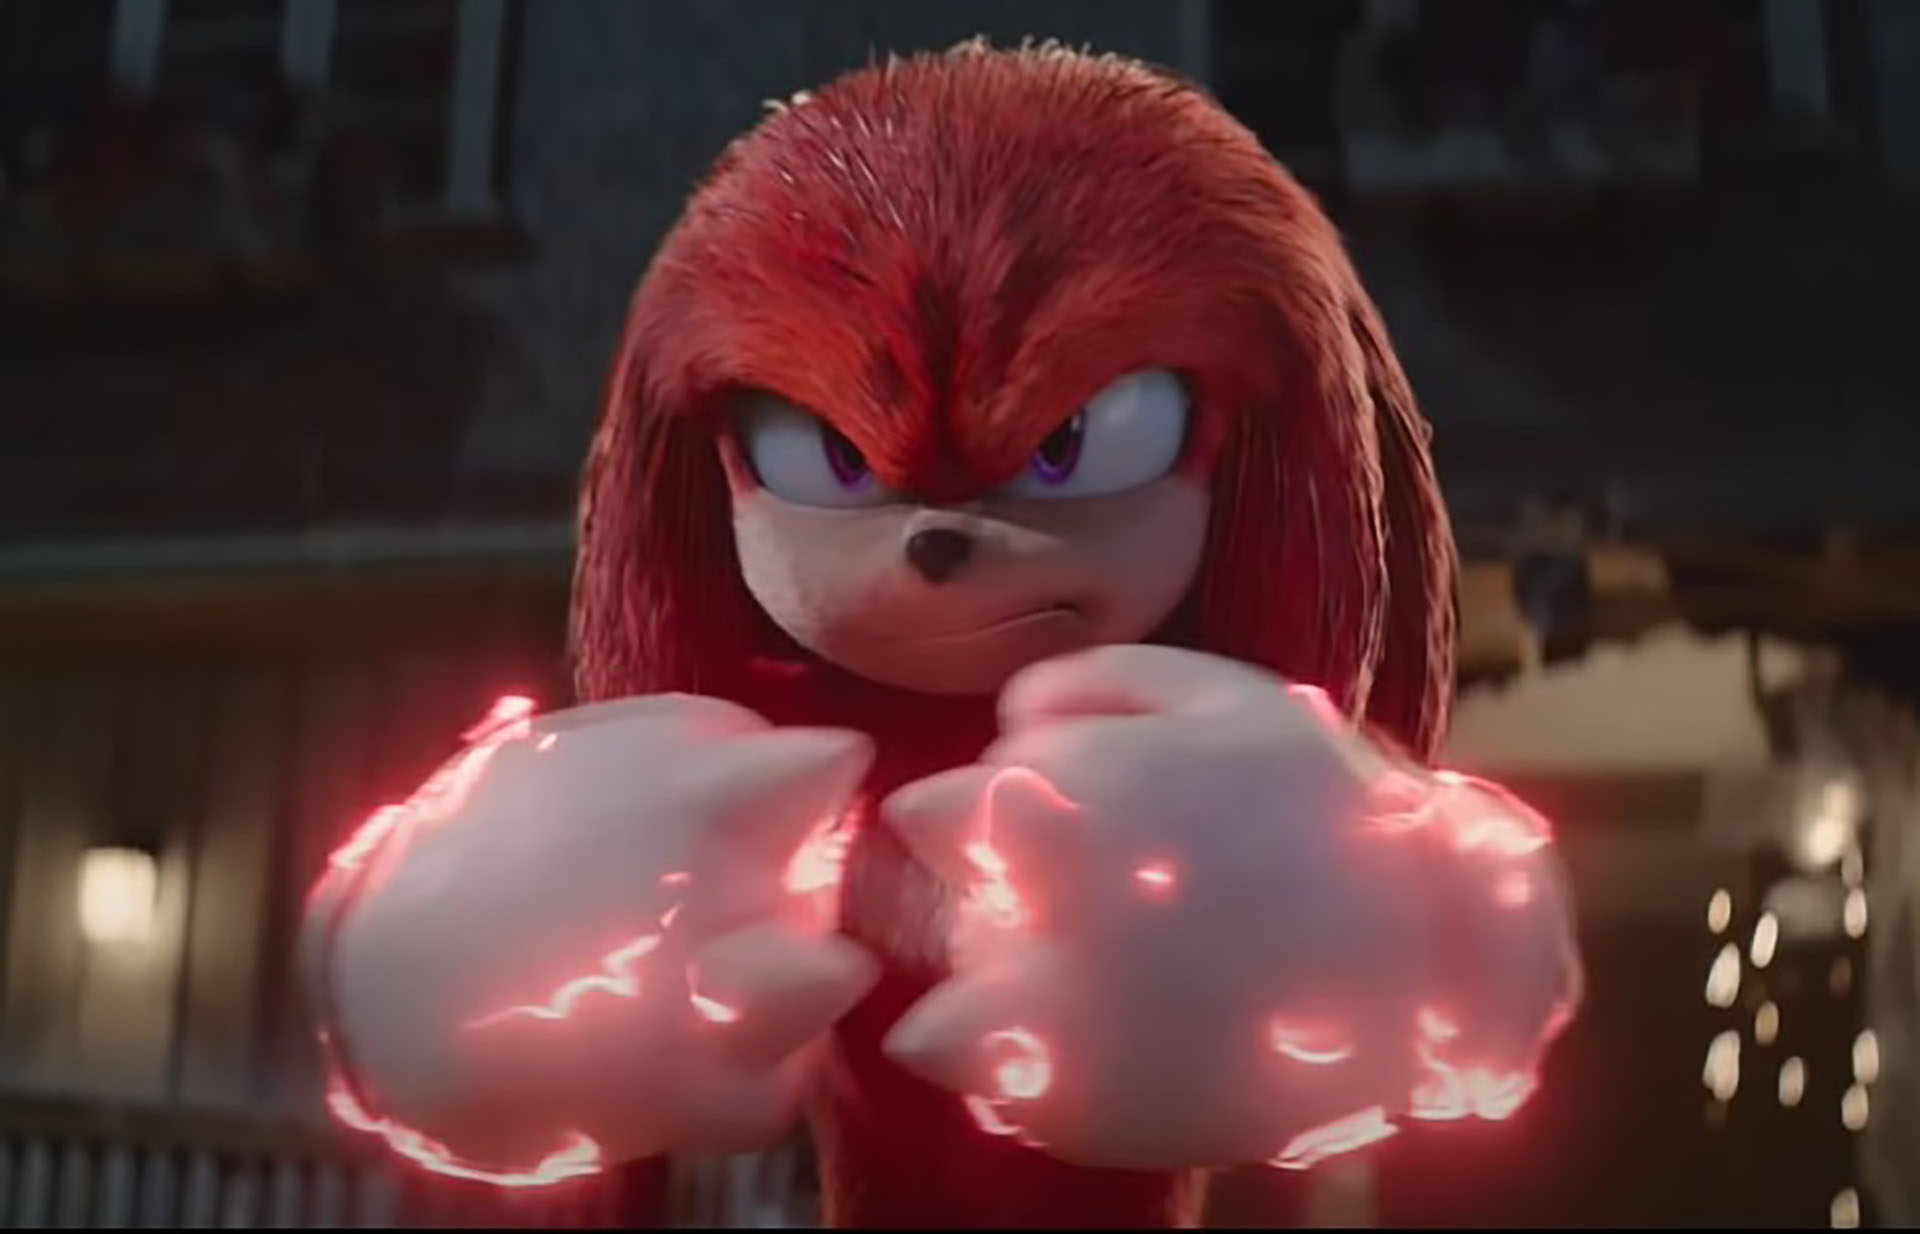 Sonic the Hedgehog 2: Tails and Knuckles Feature in the New Posters For Ben  Schwartz, Jim Carrey's Videogame Film! (View Pics)